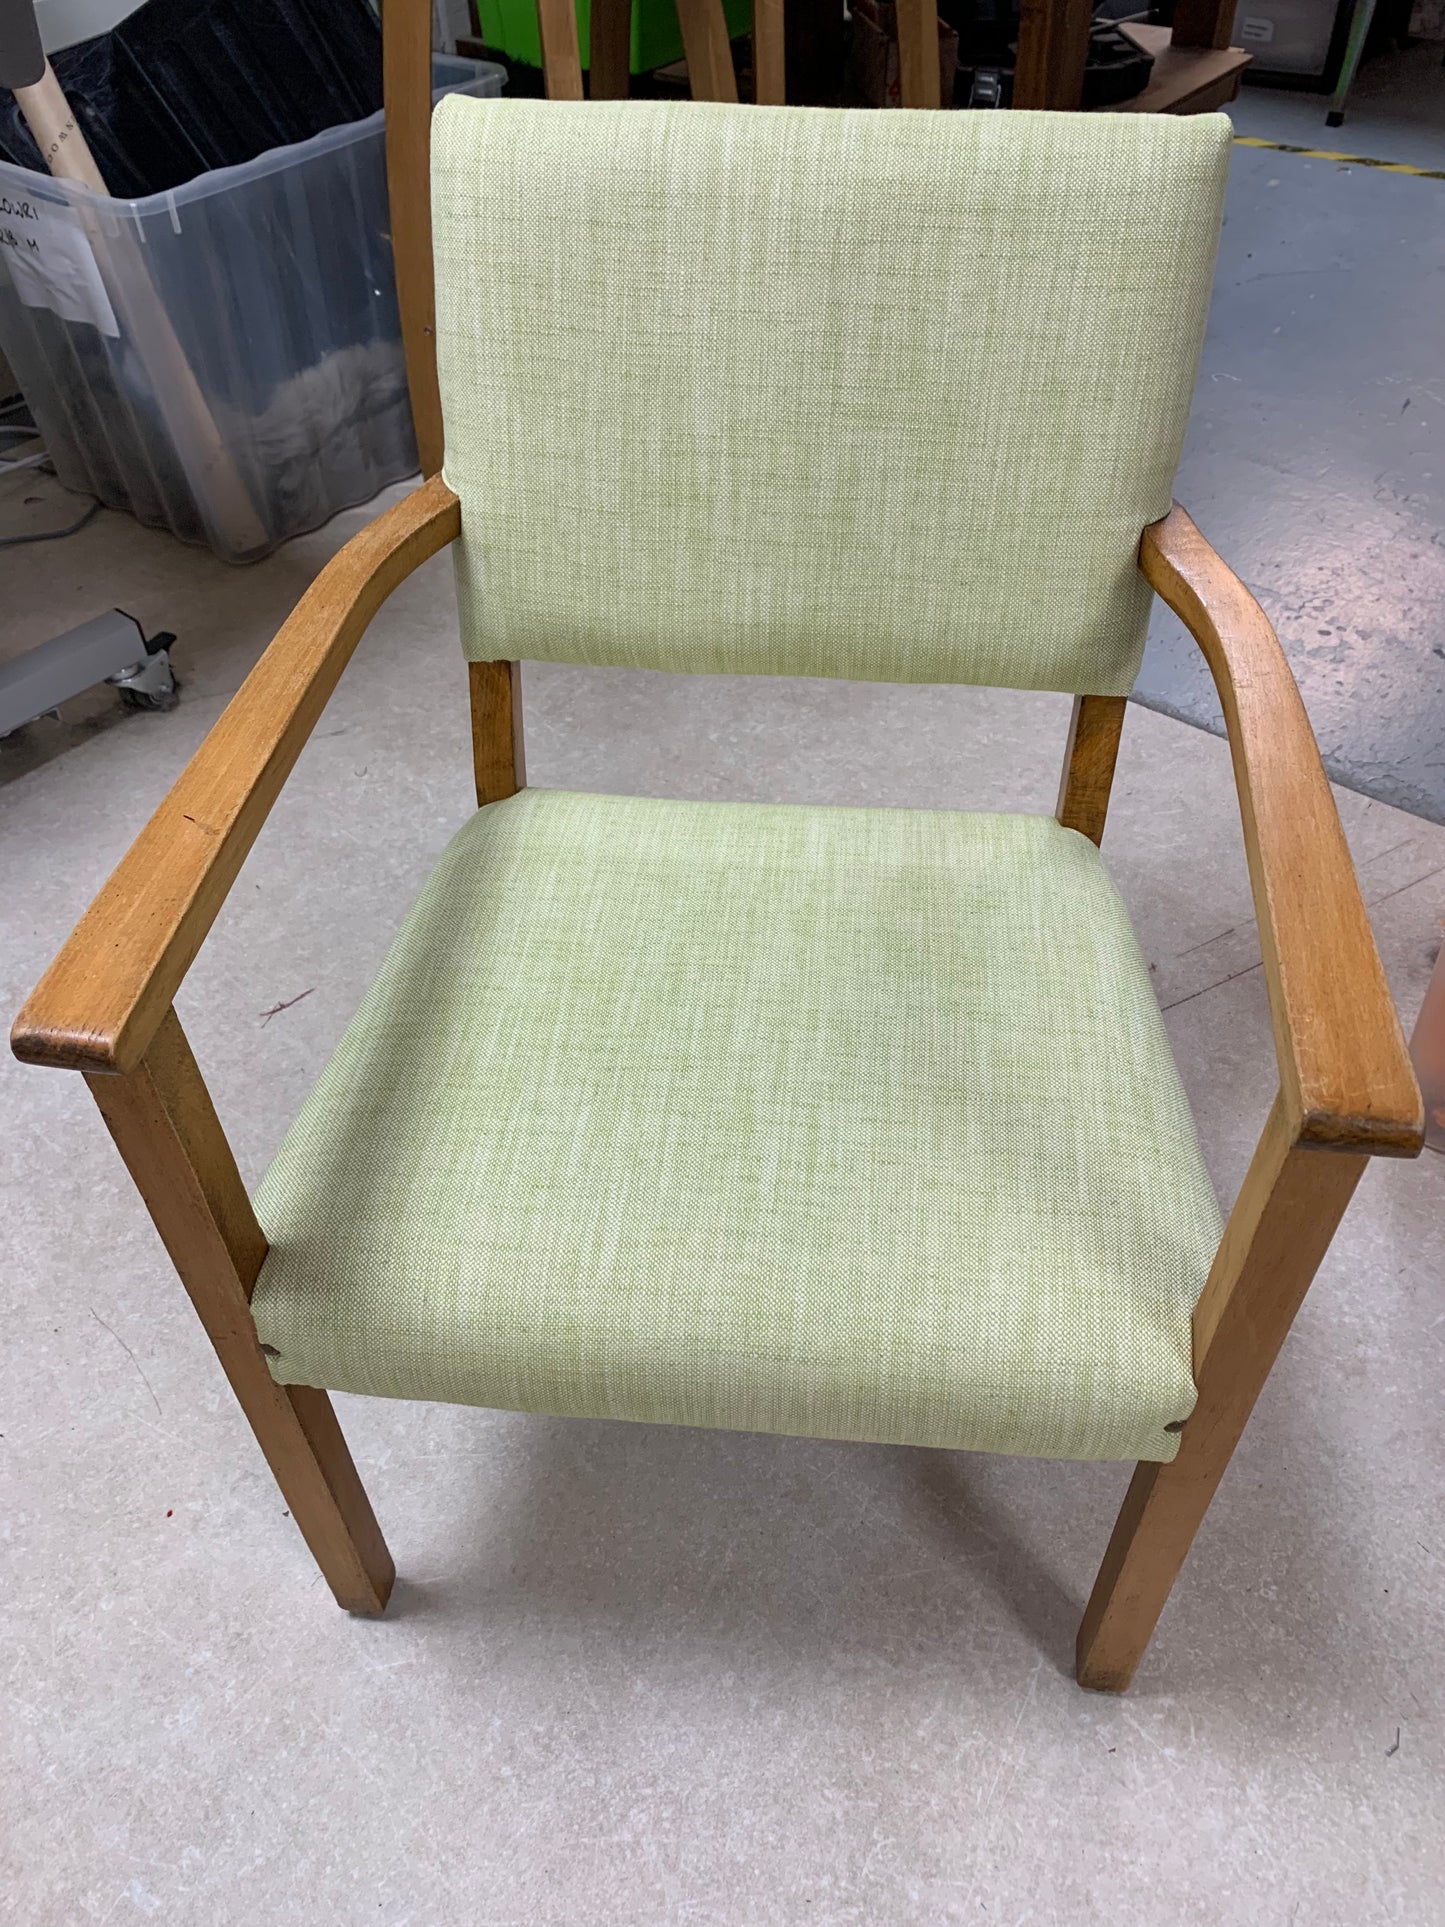 3 week upholstery course - Wednesdays pm